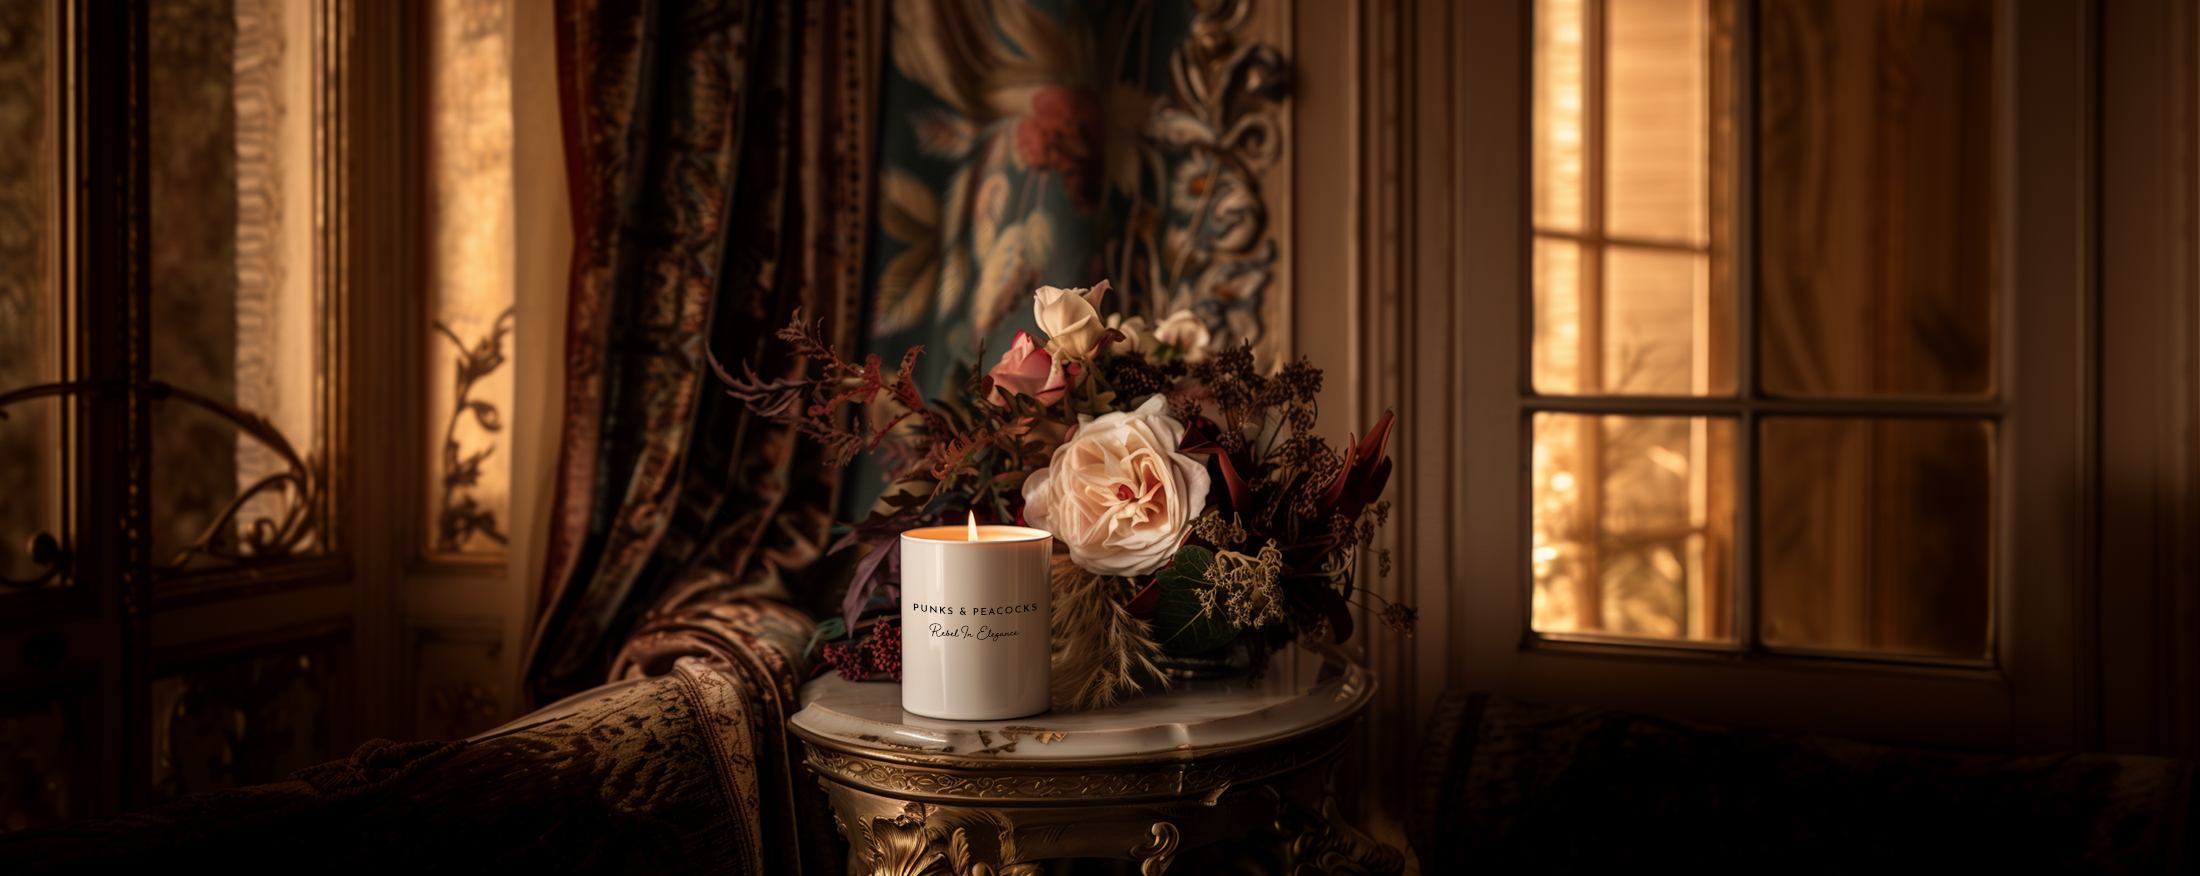 Luxury scented candle in opulent setting